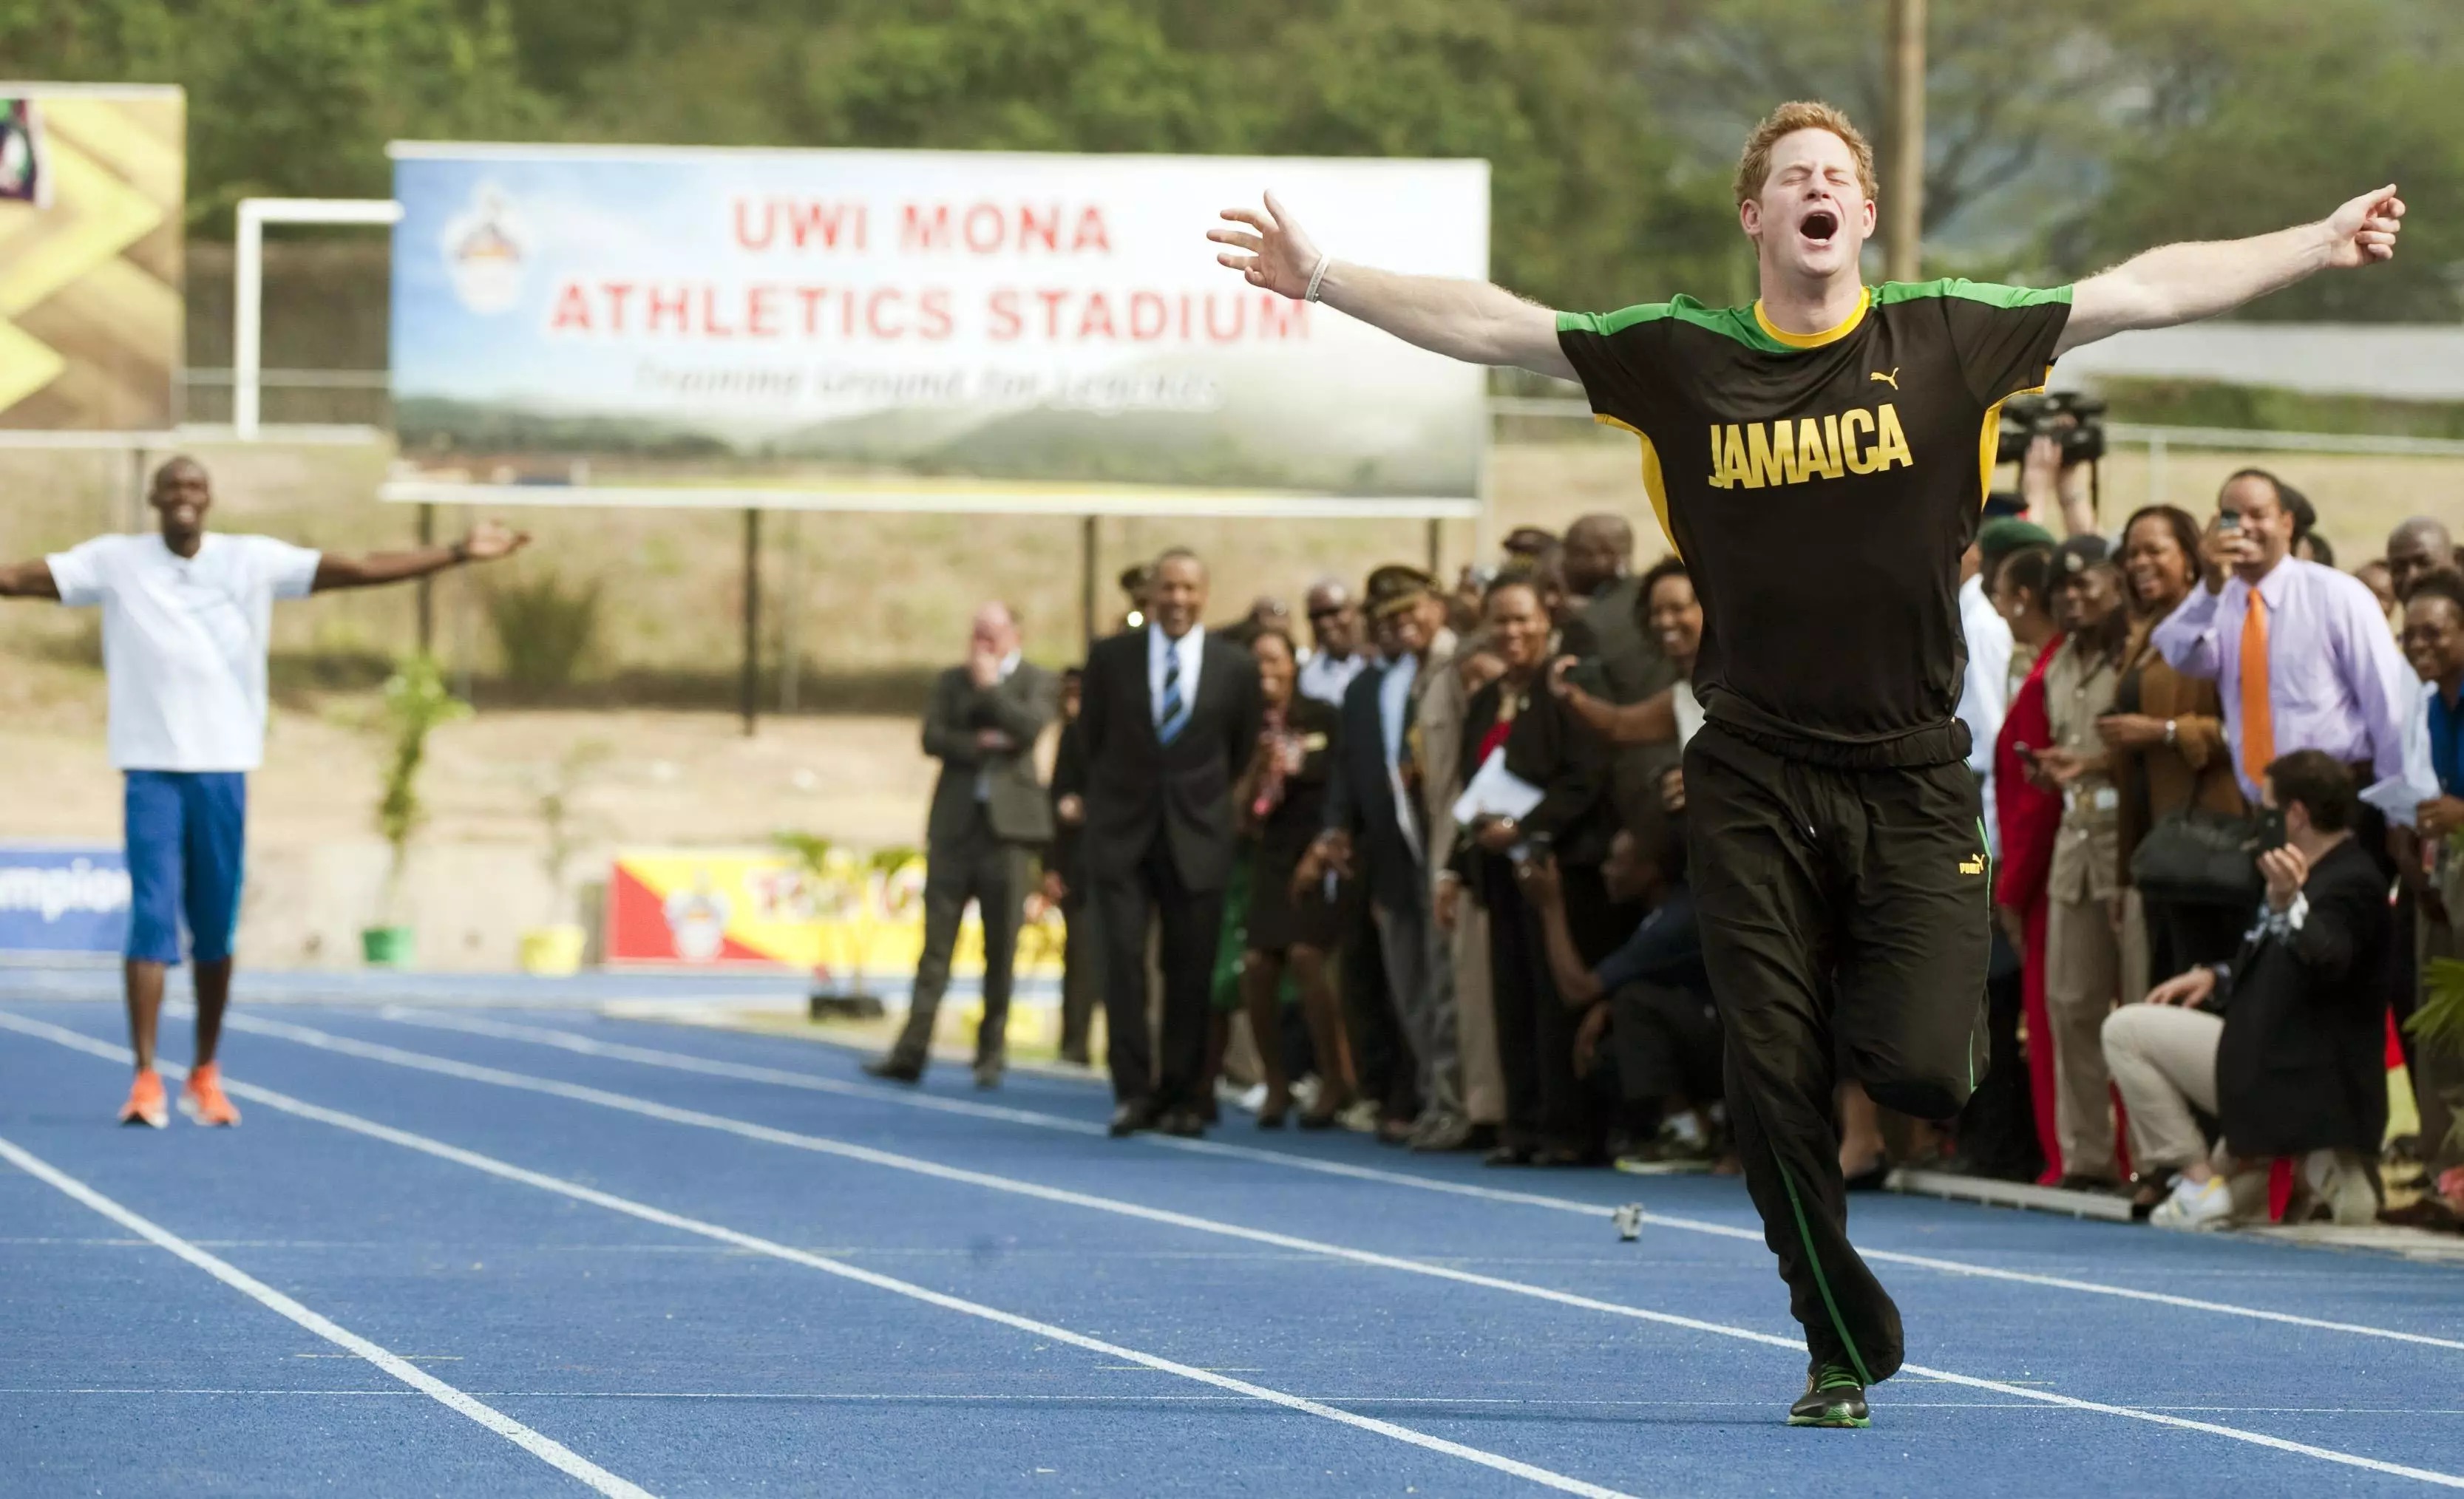 Prince Harry Sends The Internet Into A Frenzy Challenging Usain Bolt To A Re-Match